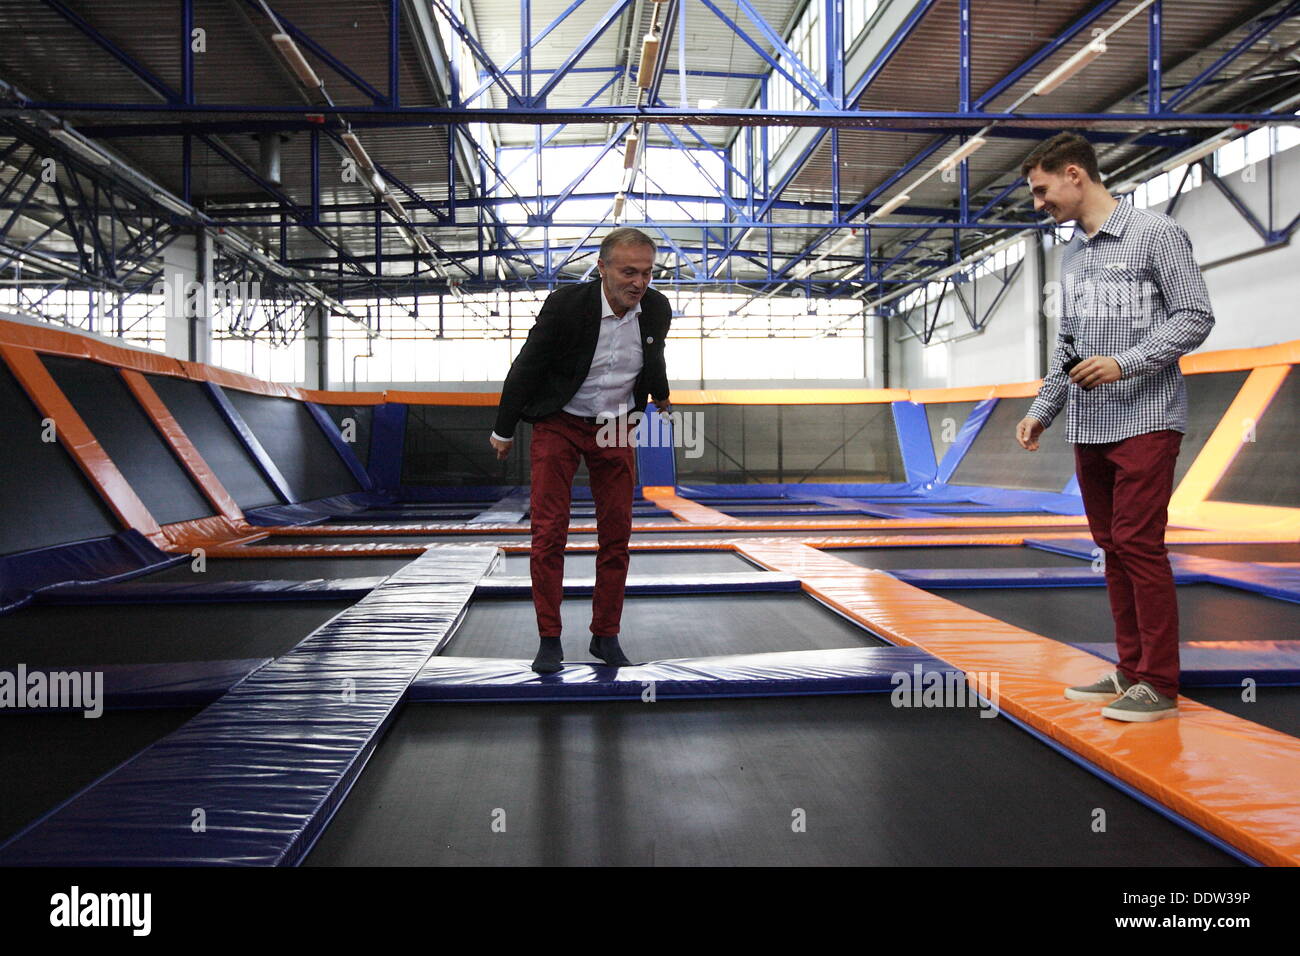 The largest free jumping arena with more than 50 trampolines